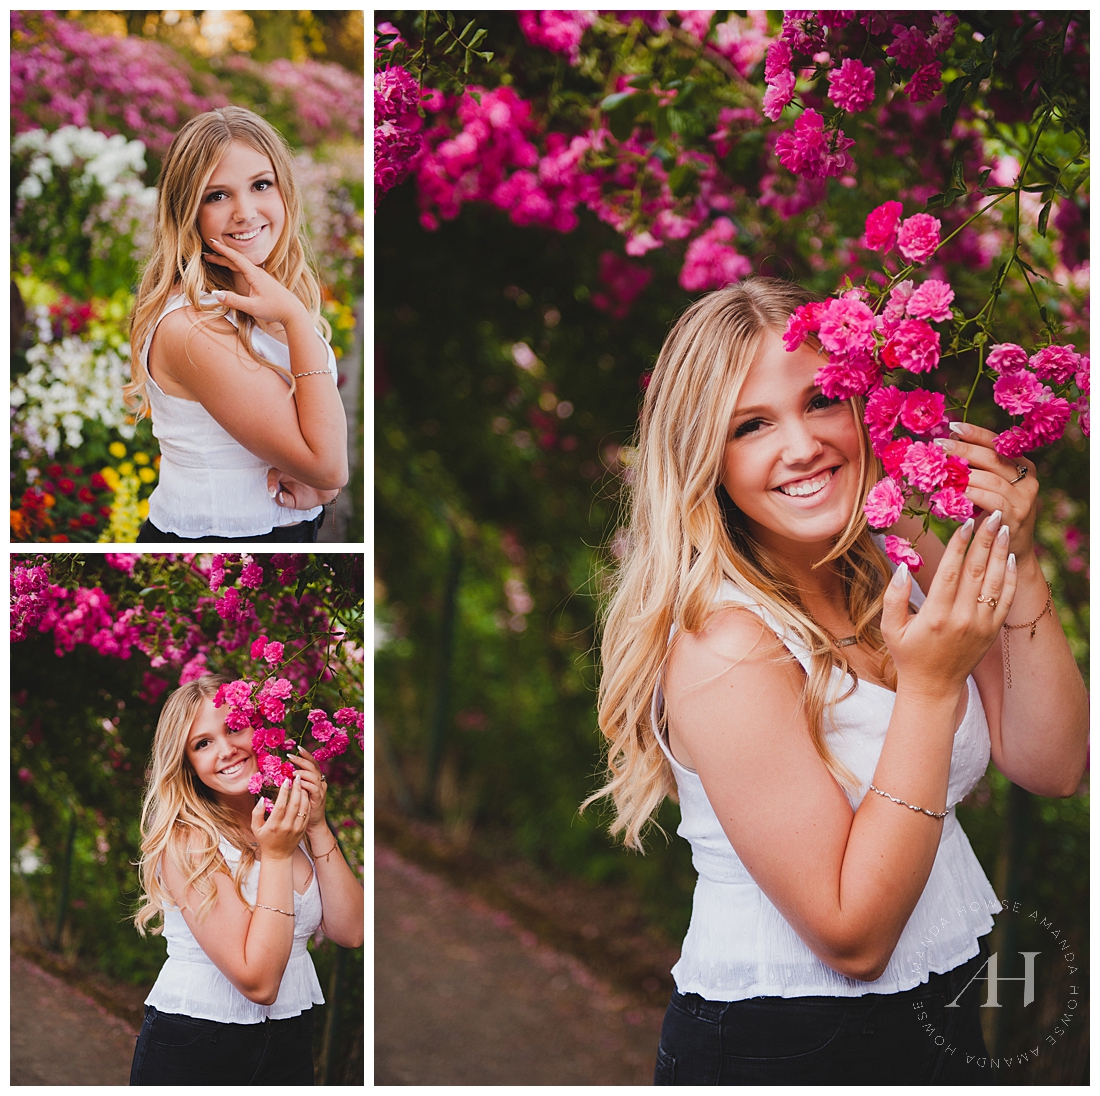 Fun Poses for Garden Portraits | How to Style a Summer Senior Portrait Session | Photographed by the Best Tacoma Senior Portrait Photographer Amanda Howse Photography